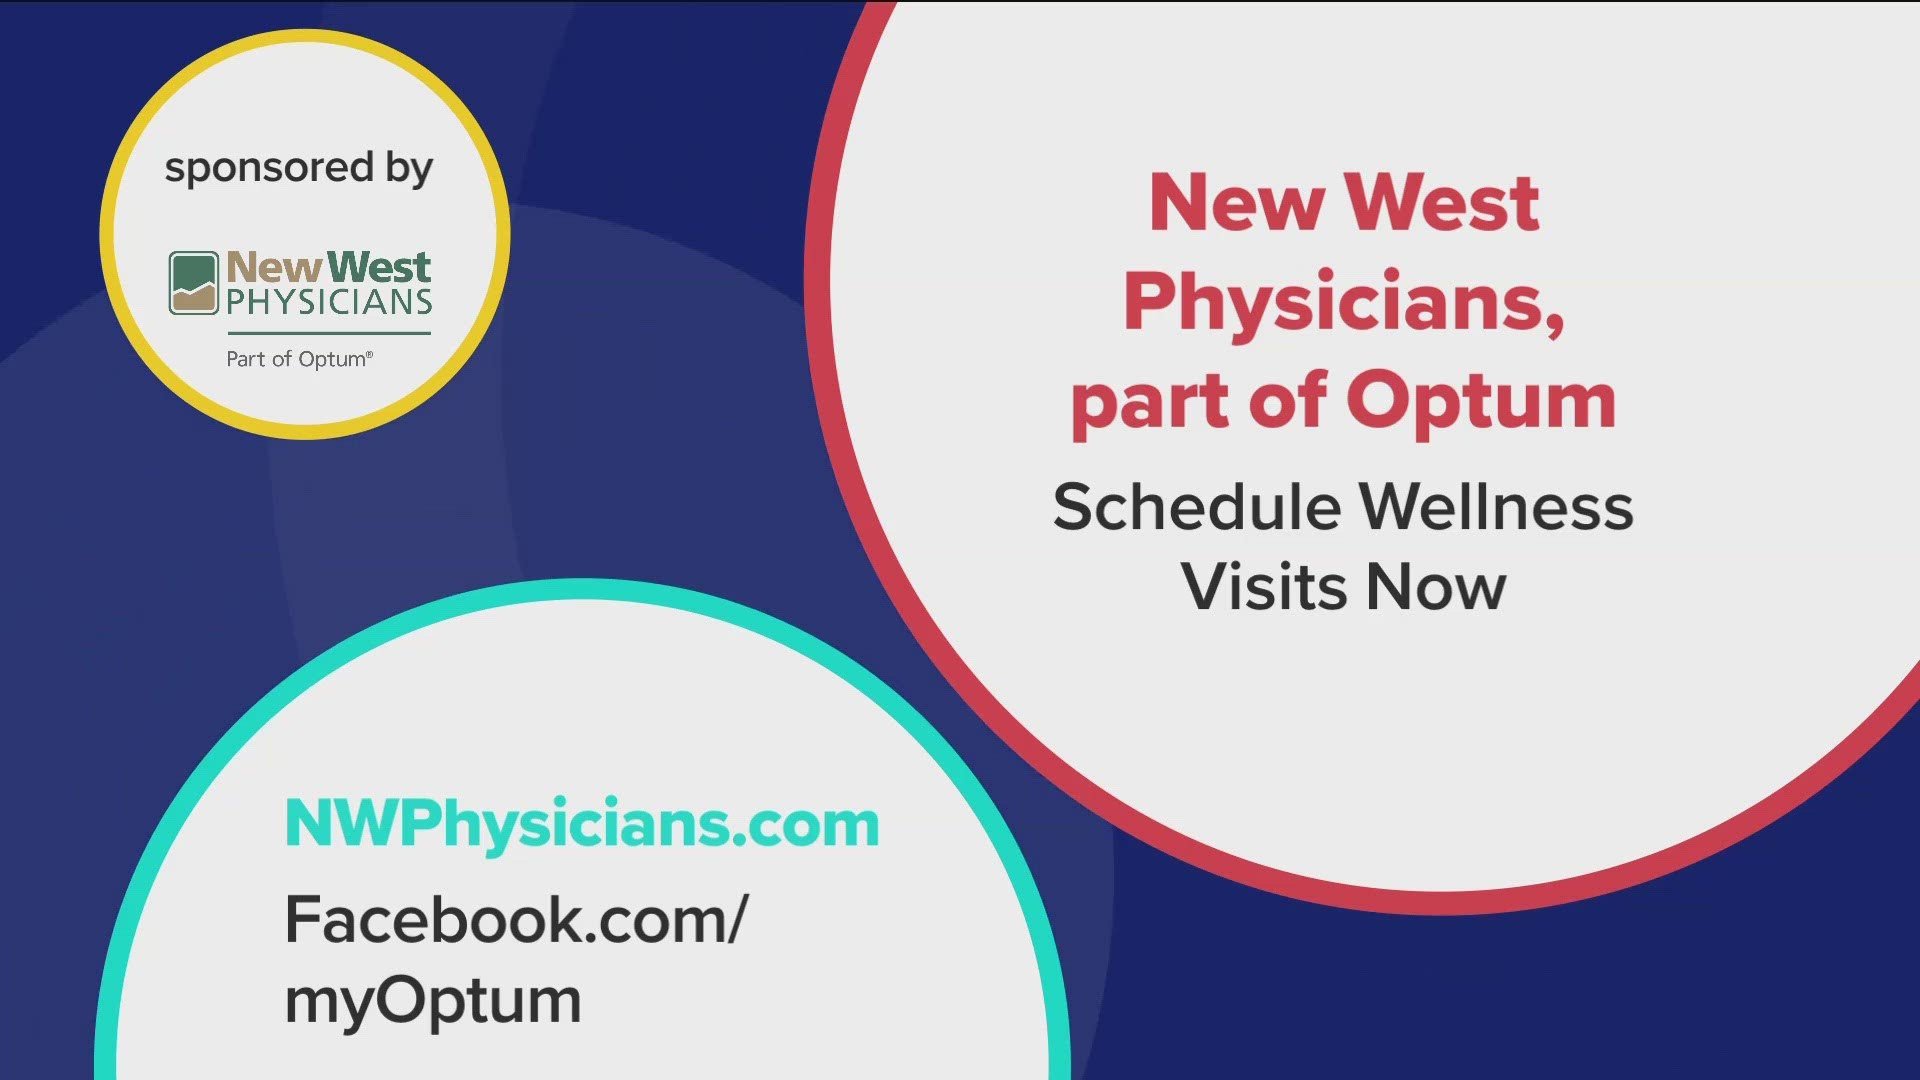 New West Physicians, Part of Optum is here for you. Learn more about annual wellness checks at NWPhysicians.com. **PAID CONTENT**